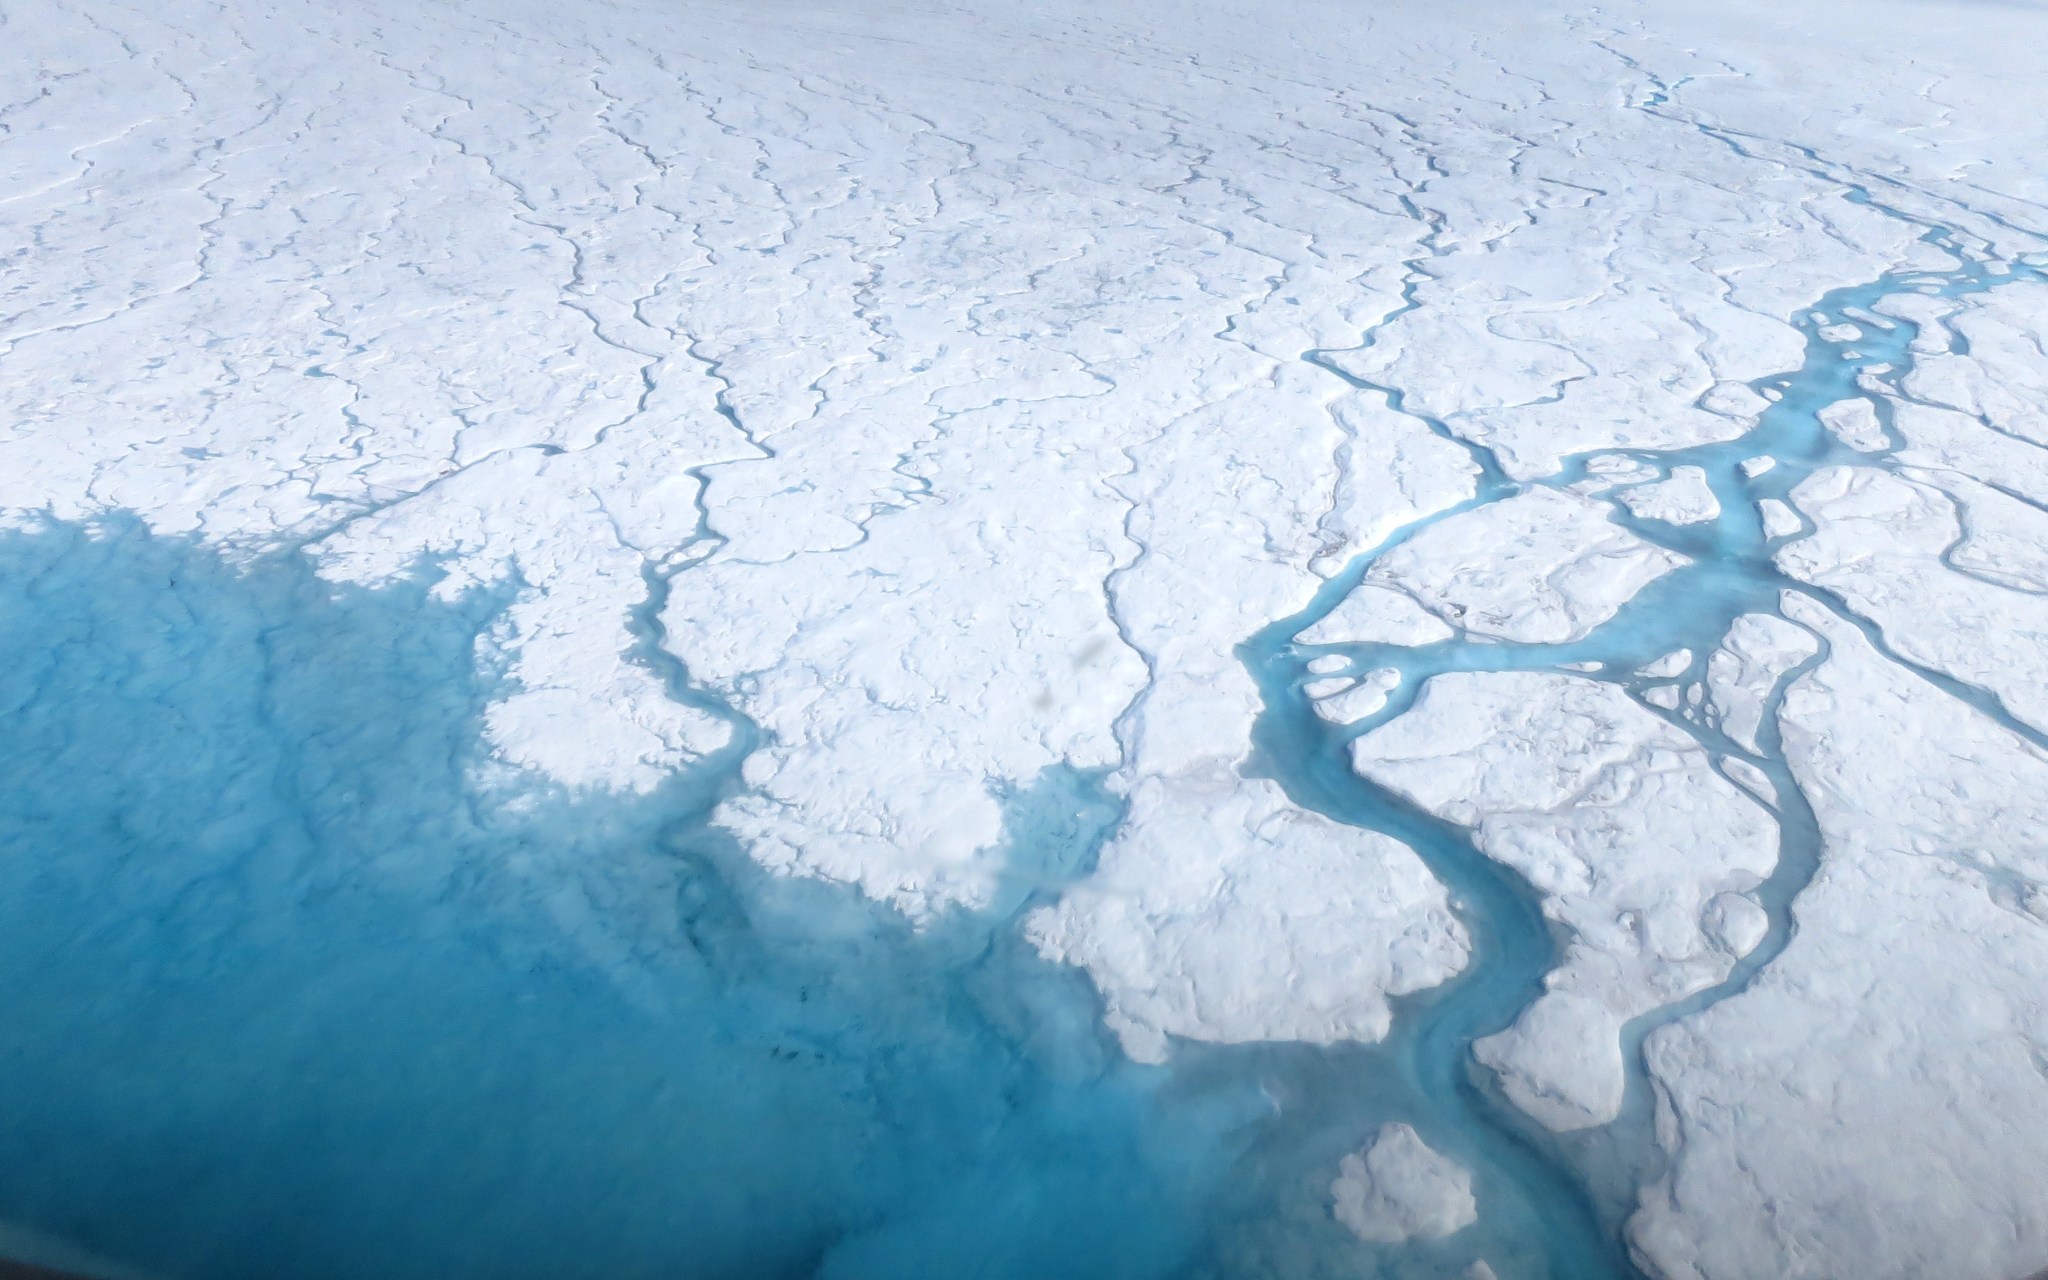 spring- and summer-forming streams and rivers on the Greenland ice sheet